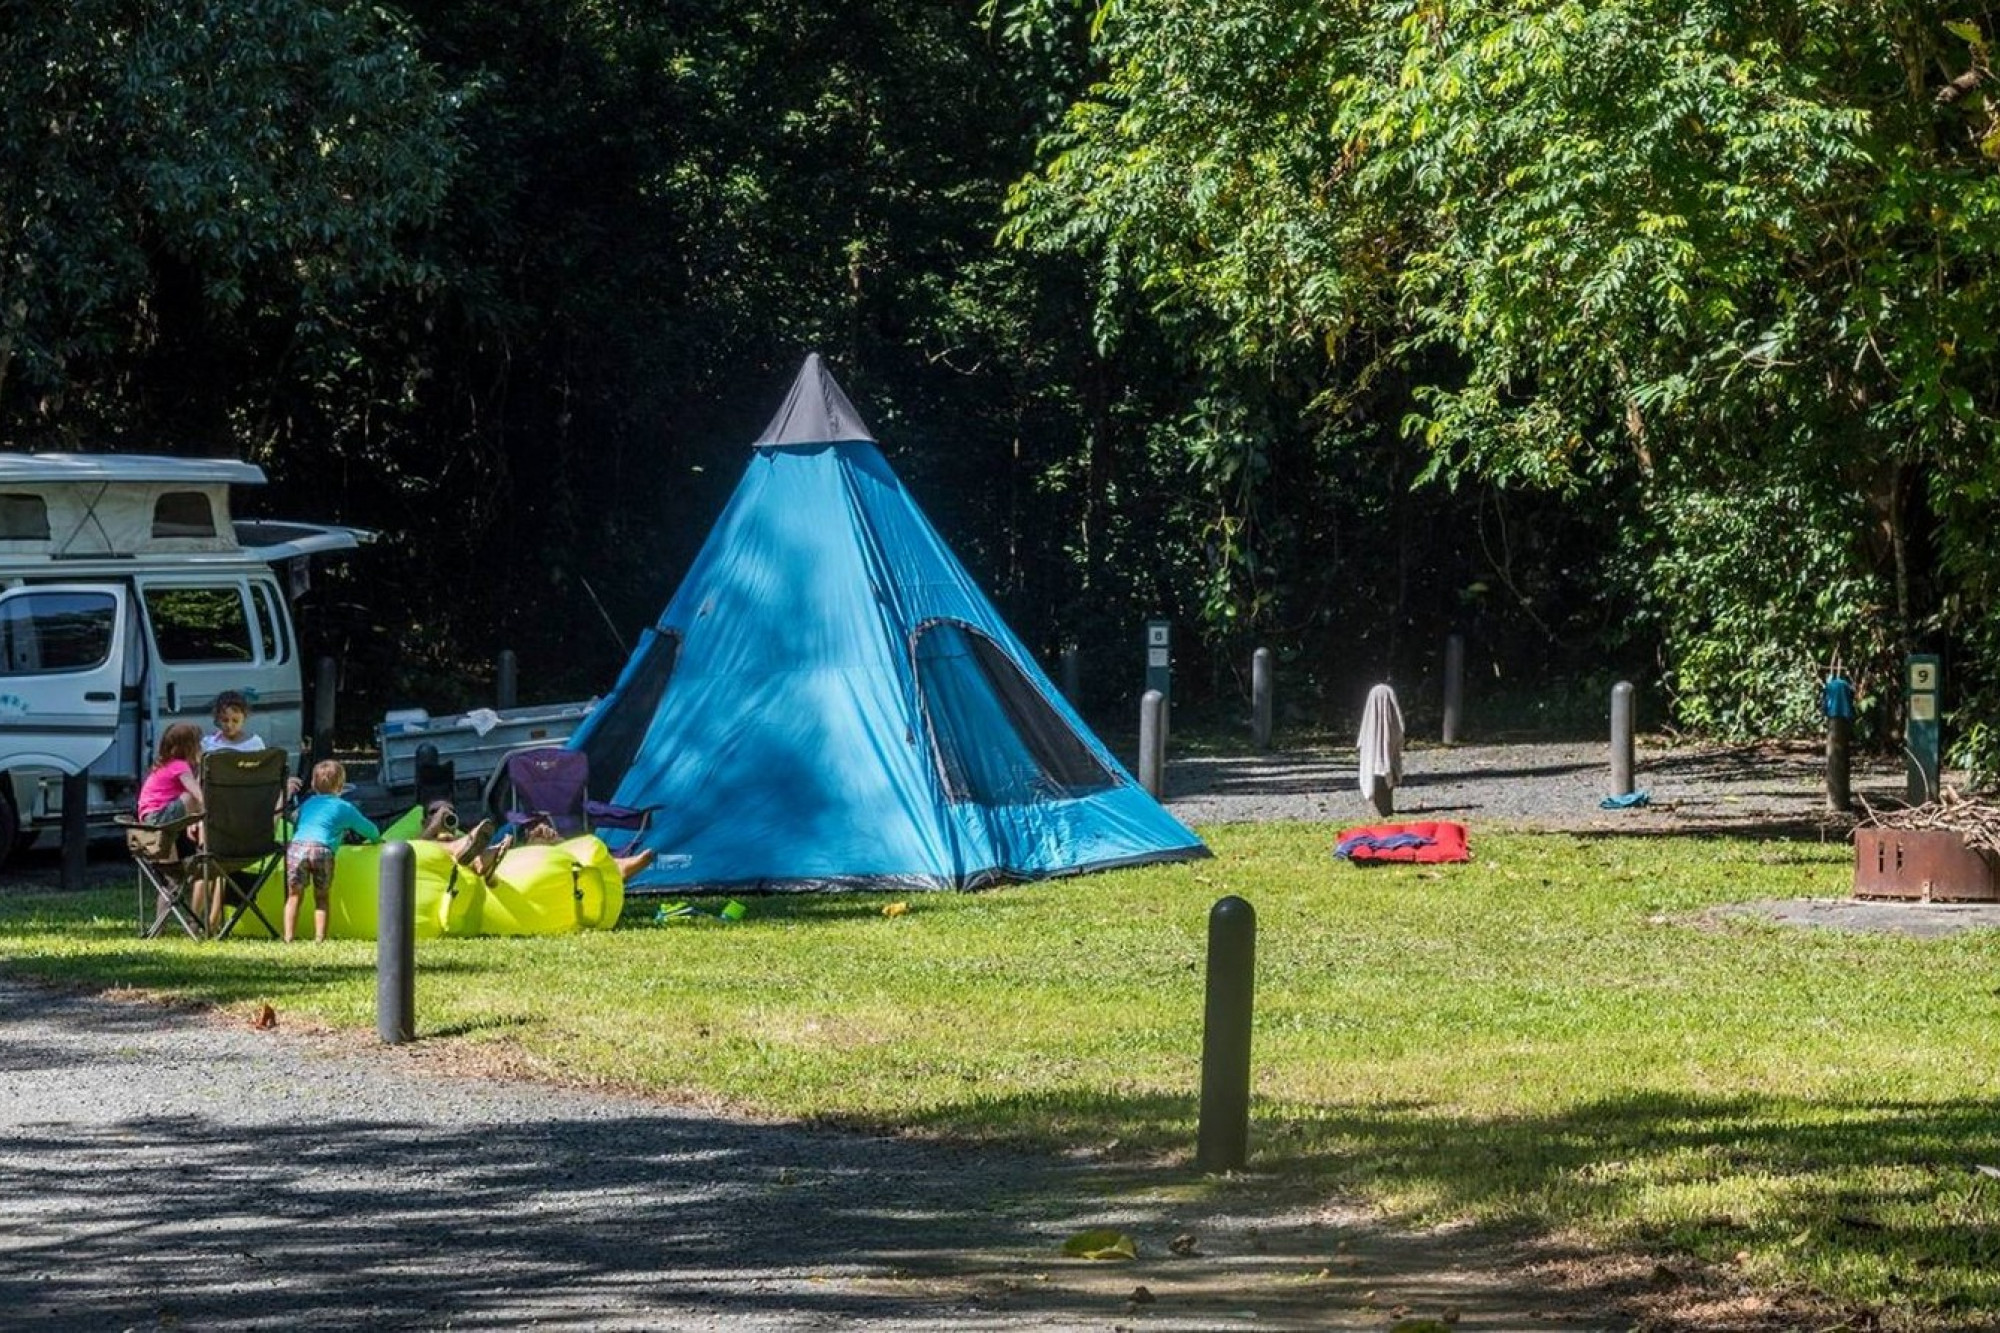 Local national parks closed for camping - feature photo